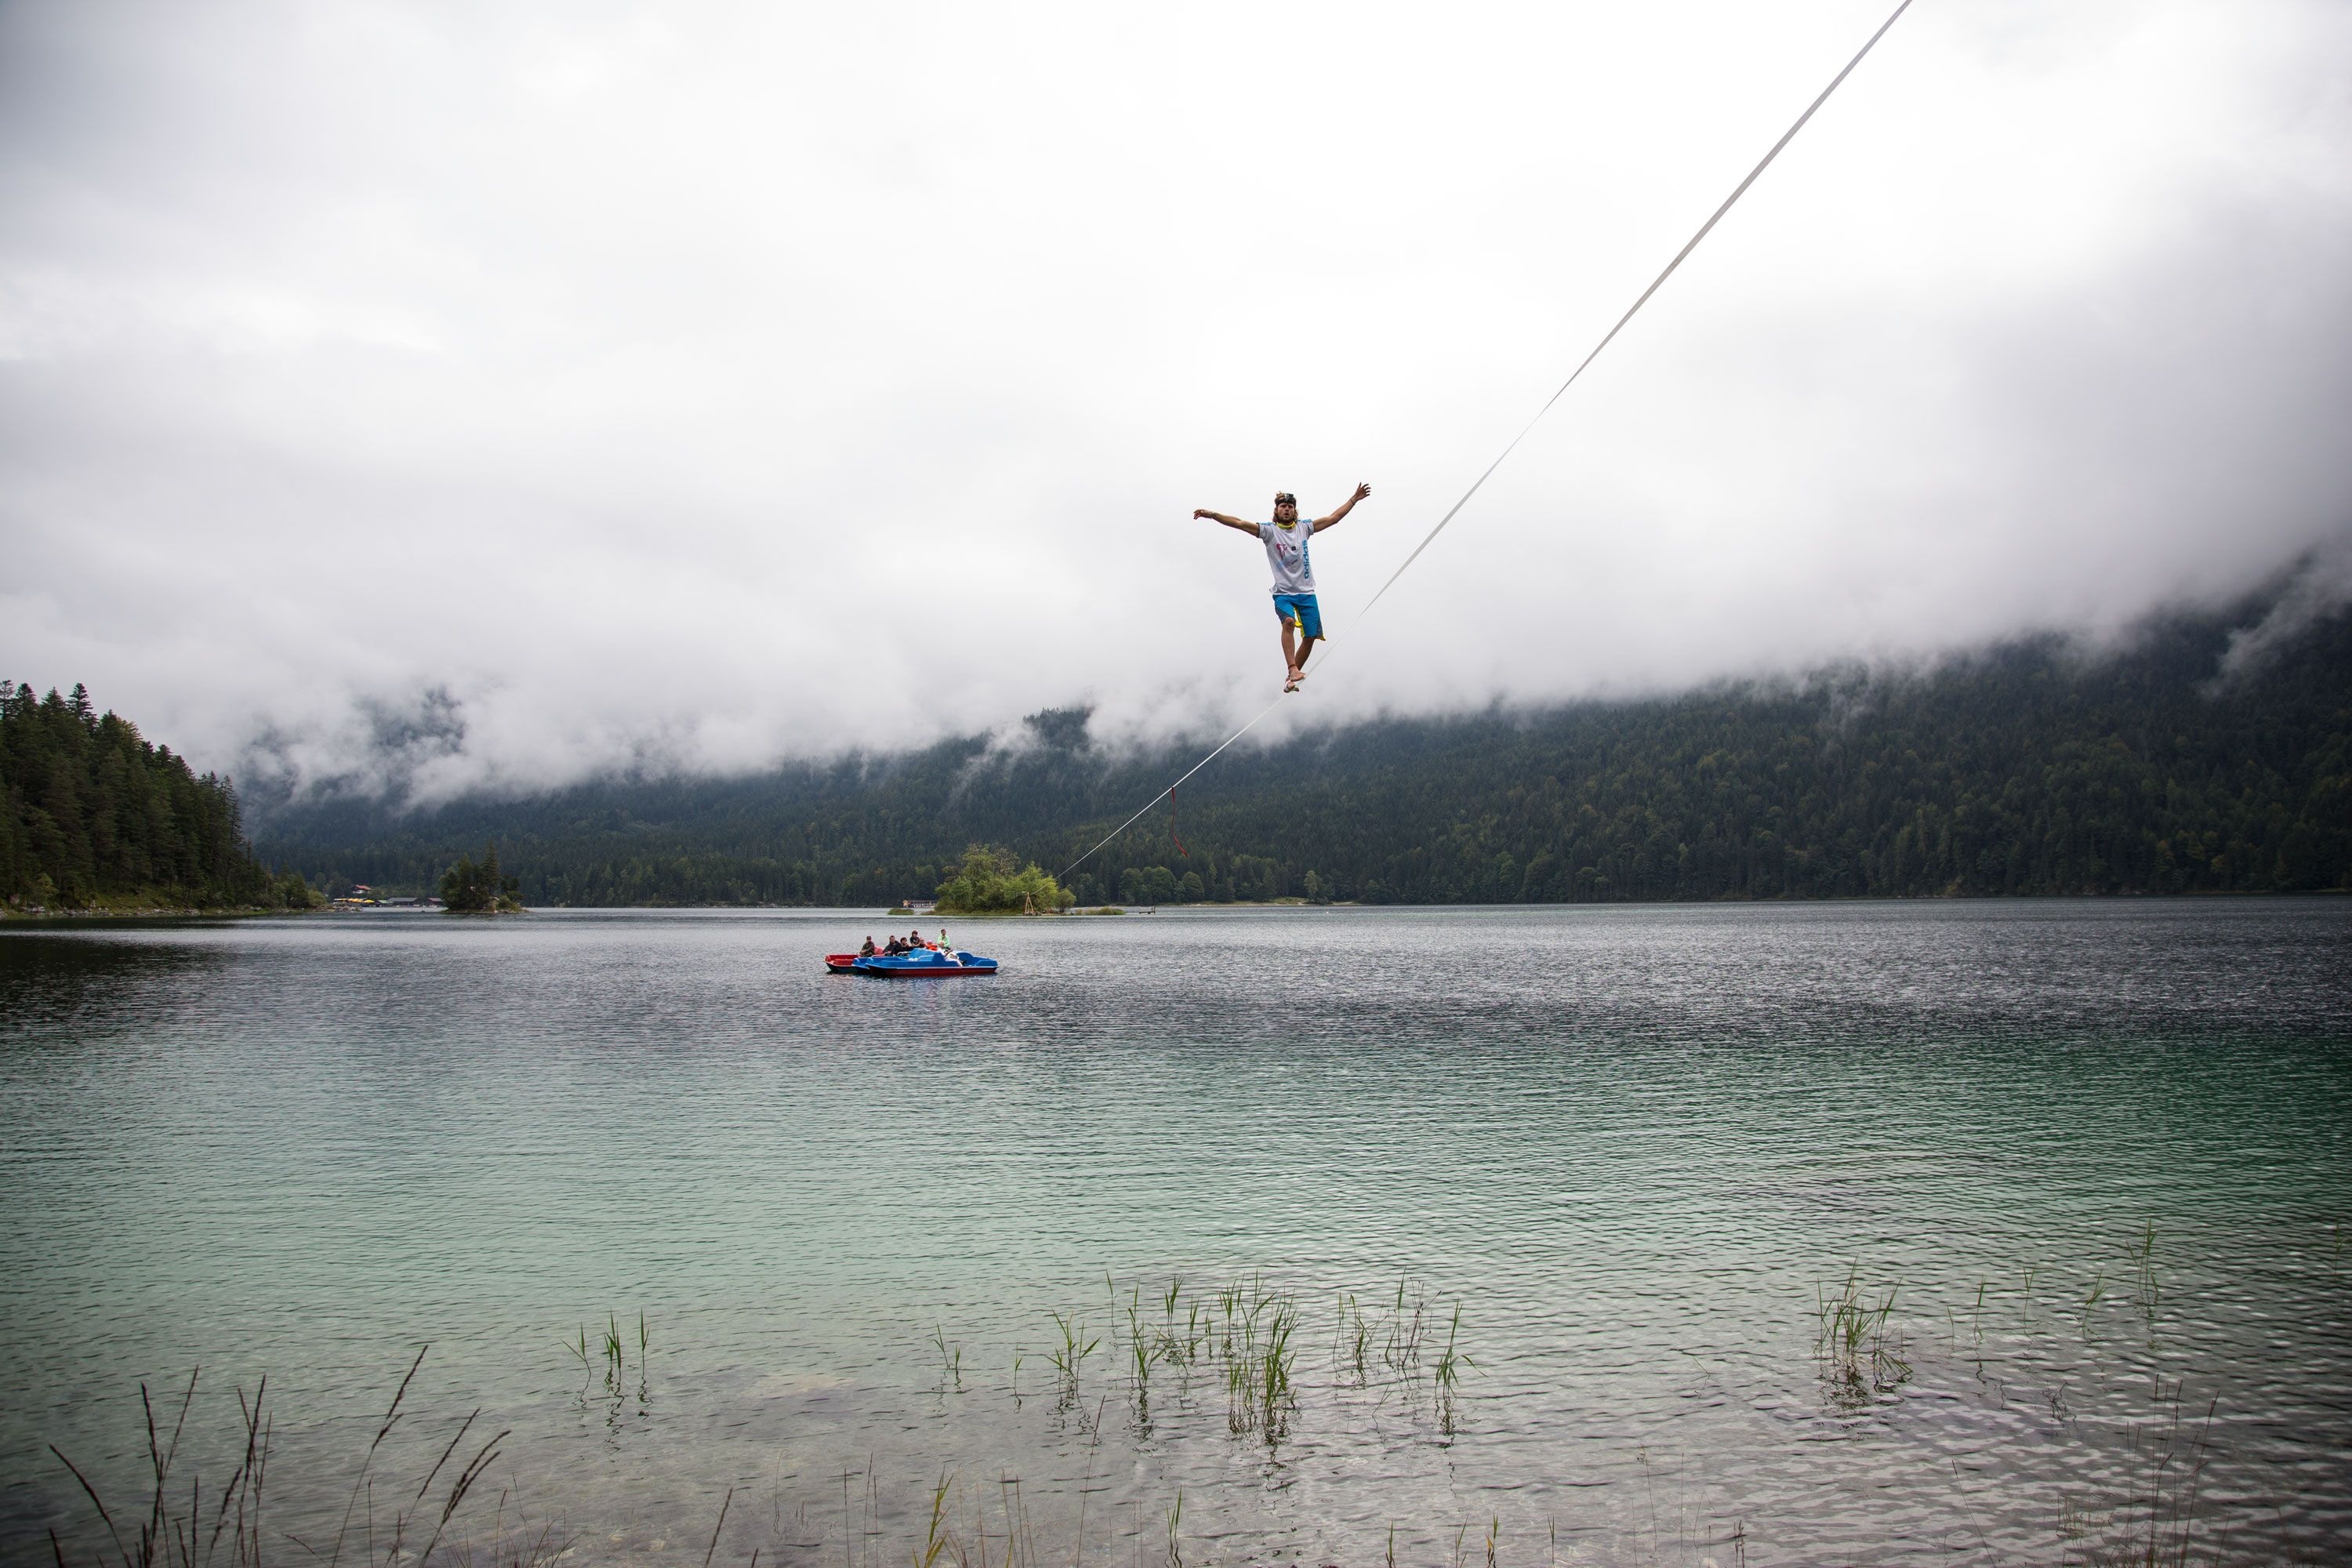 Slacklining: Highlining at an elevation above the water, An extreme kind of sports. 3000x2000 HD Background.